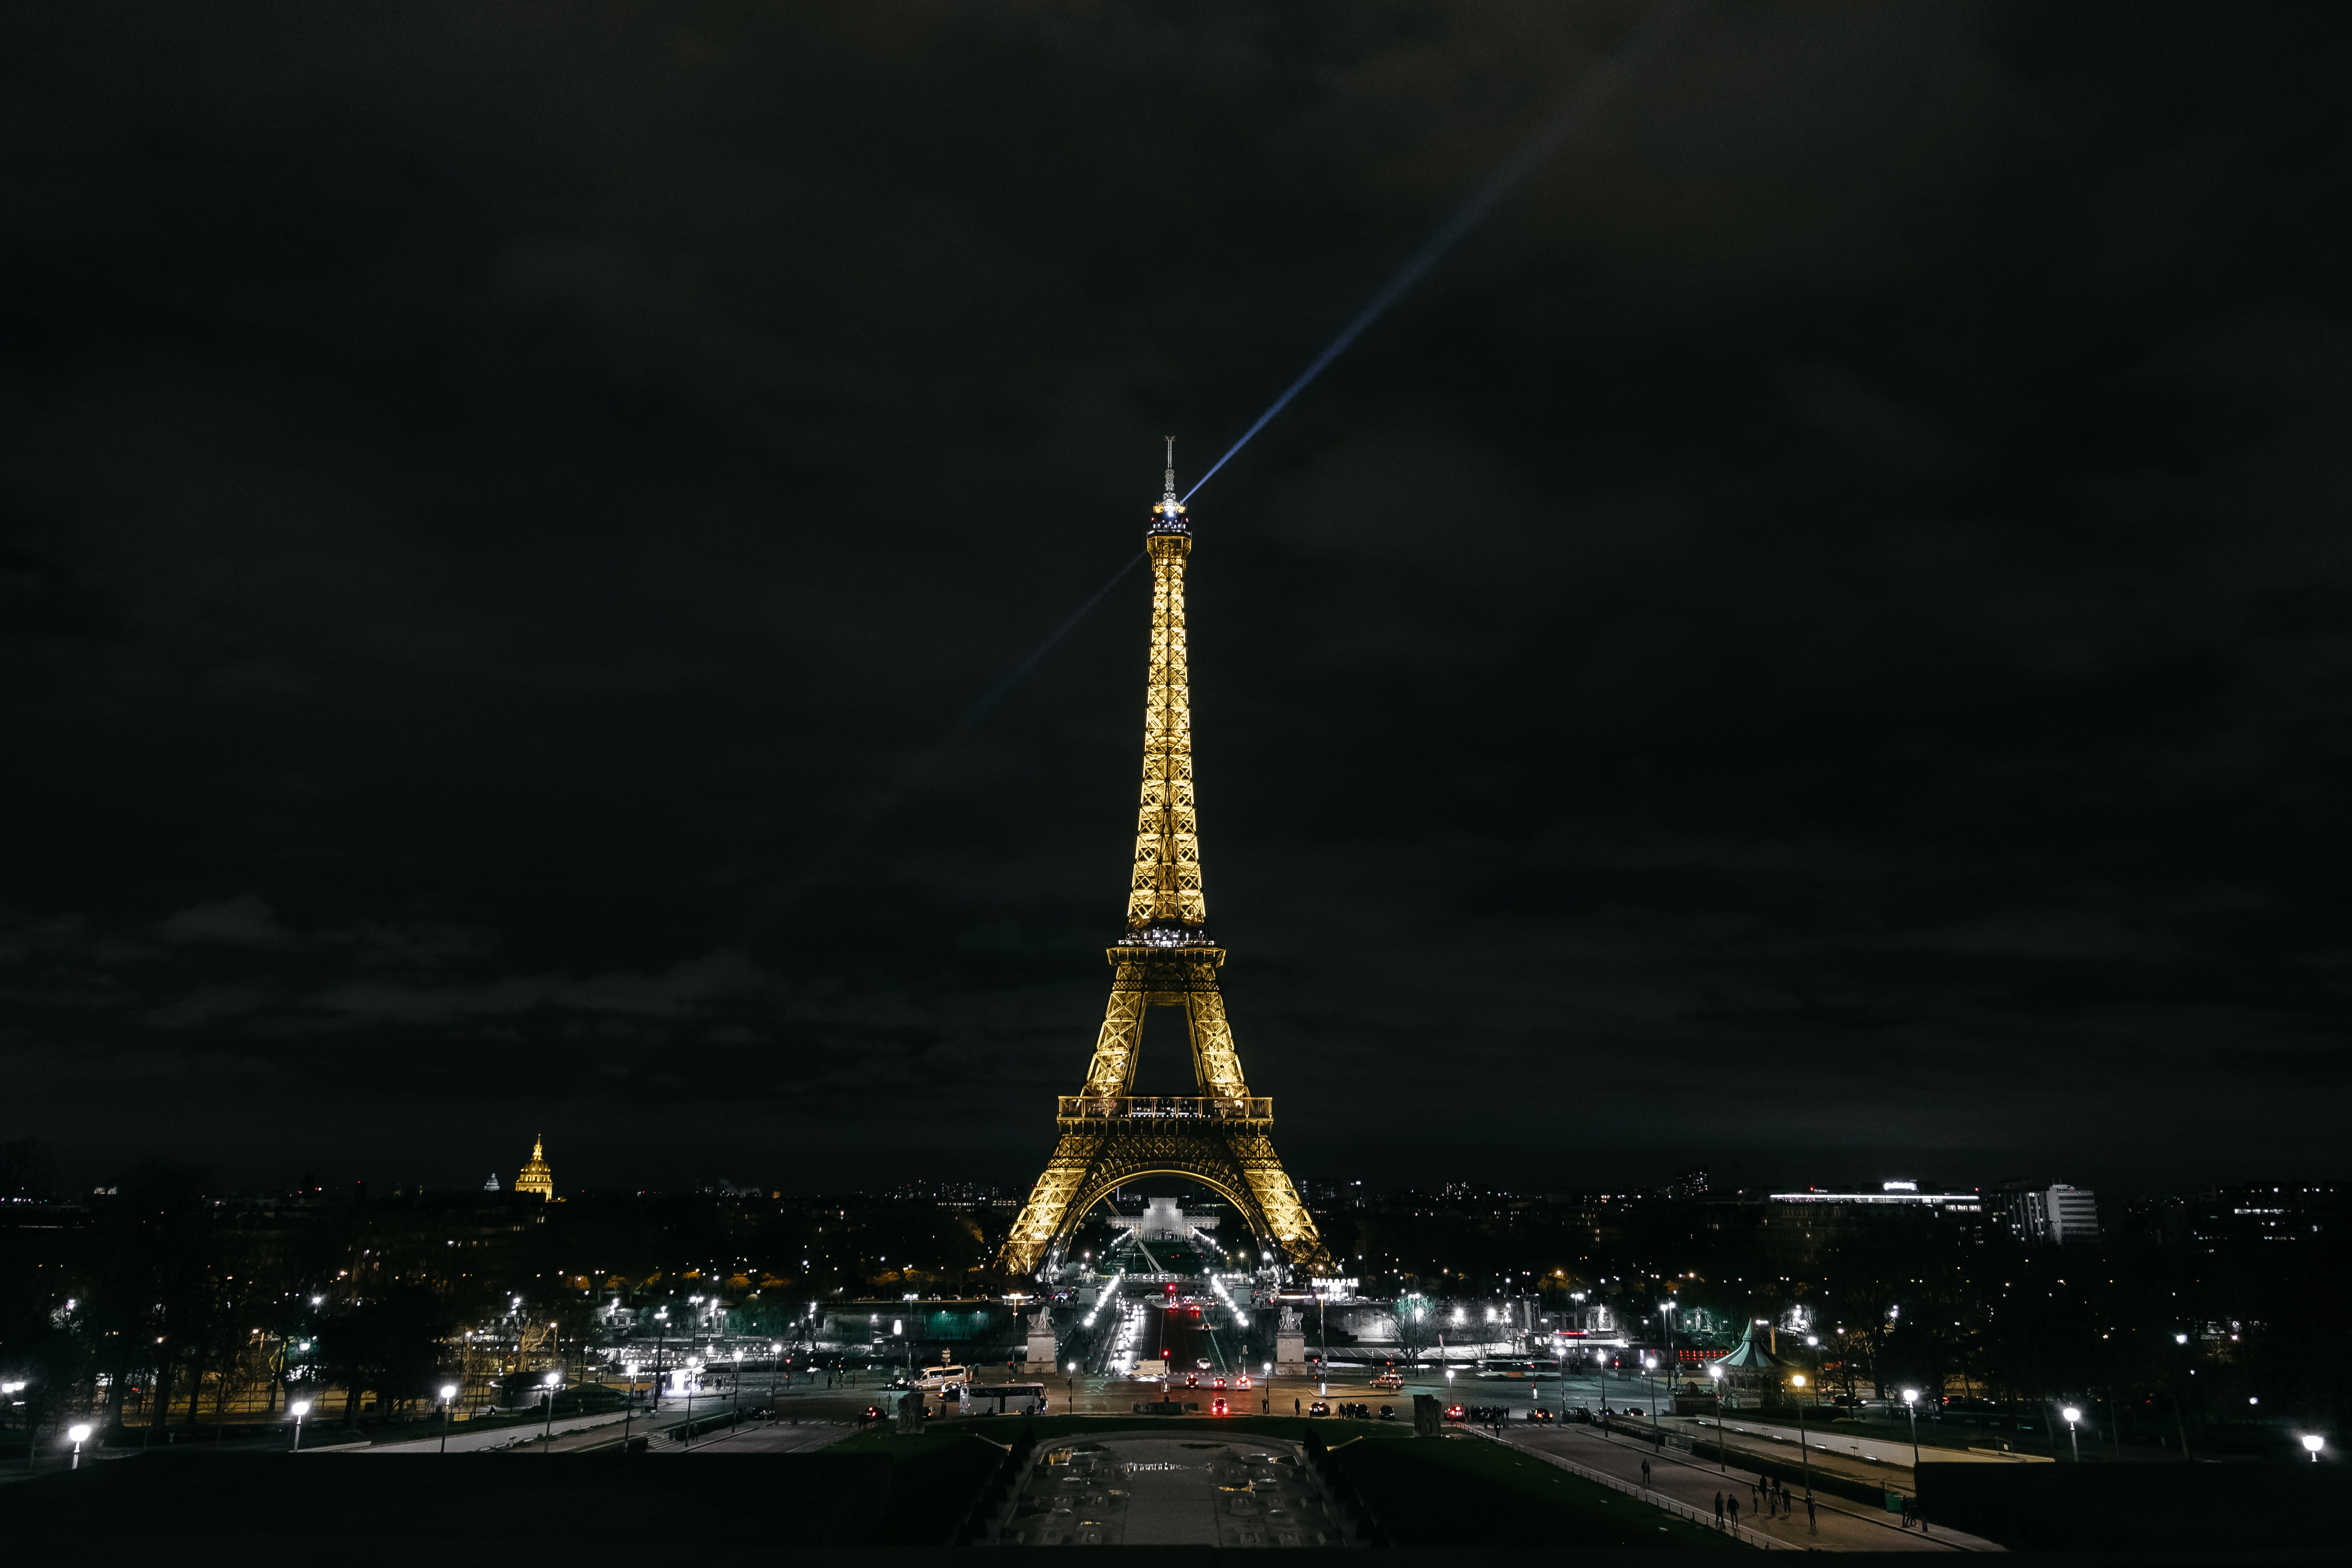 Download Eiffel Tower wallpaper for mobile phone, free Eiffel Tower HD picture